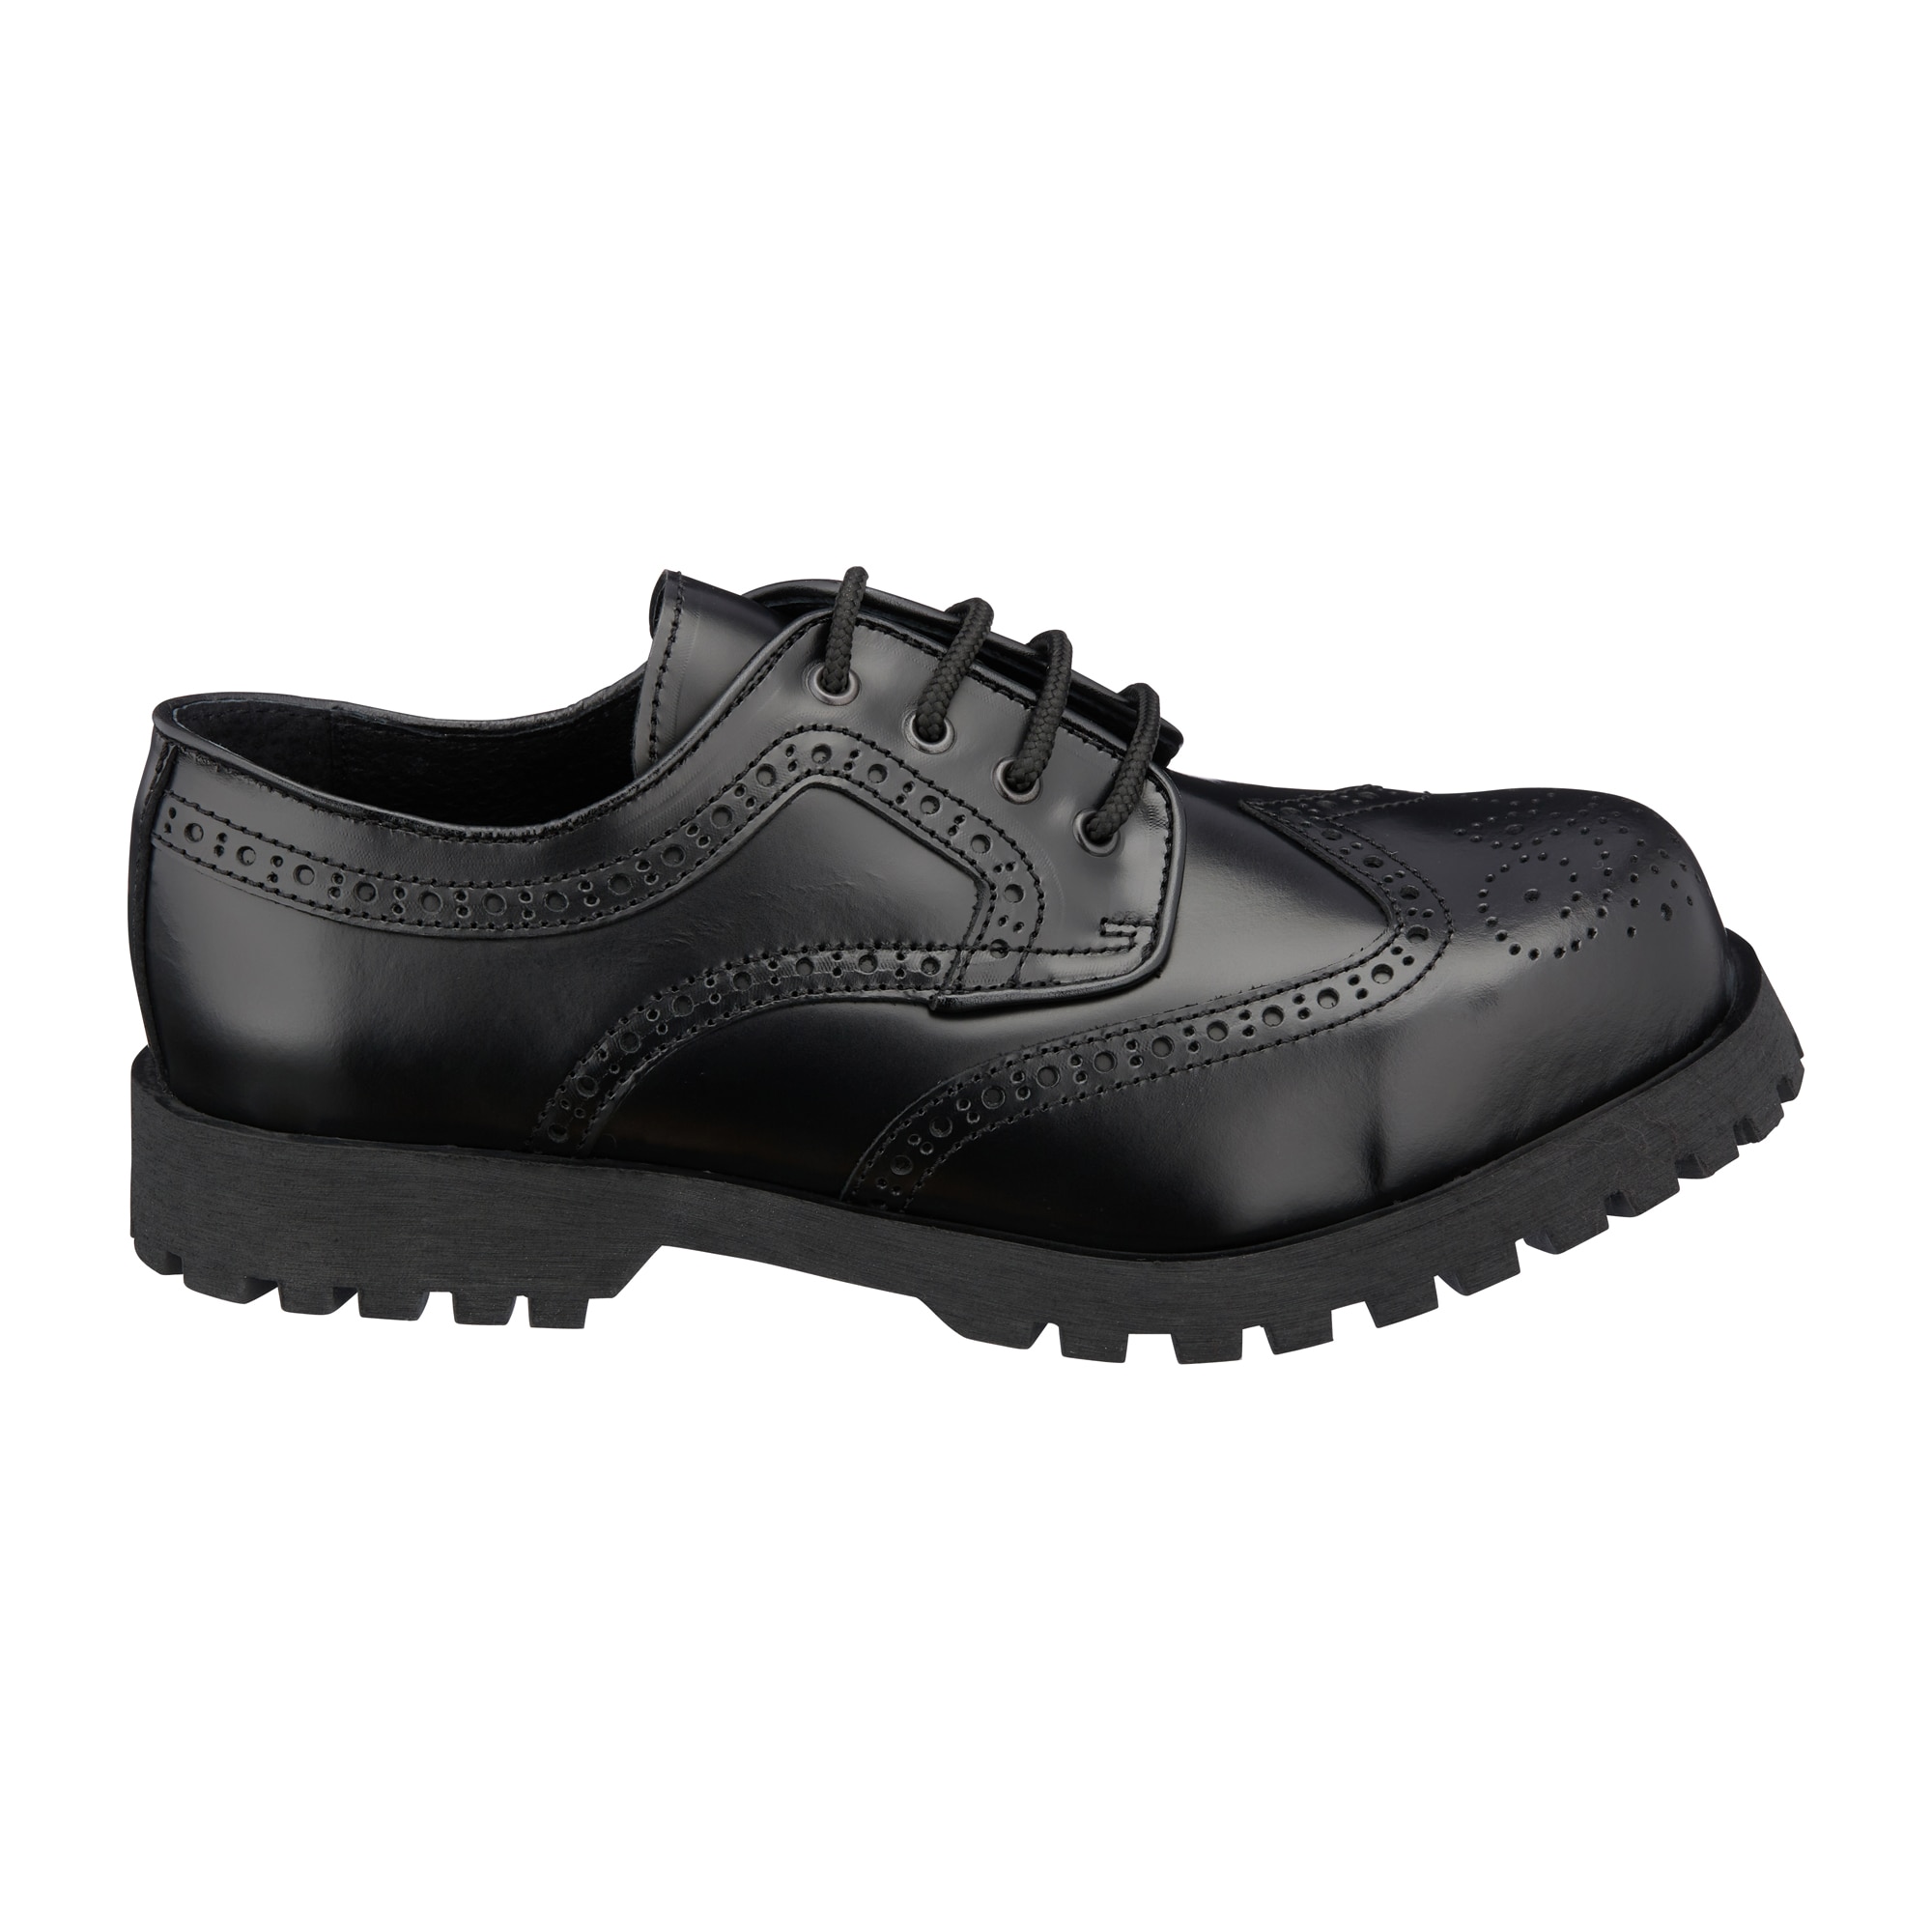 Purchase the Boots & Braces Low Shoe Budapest 4-hole black by AS